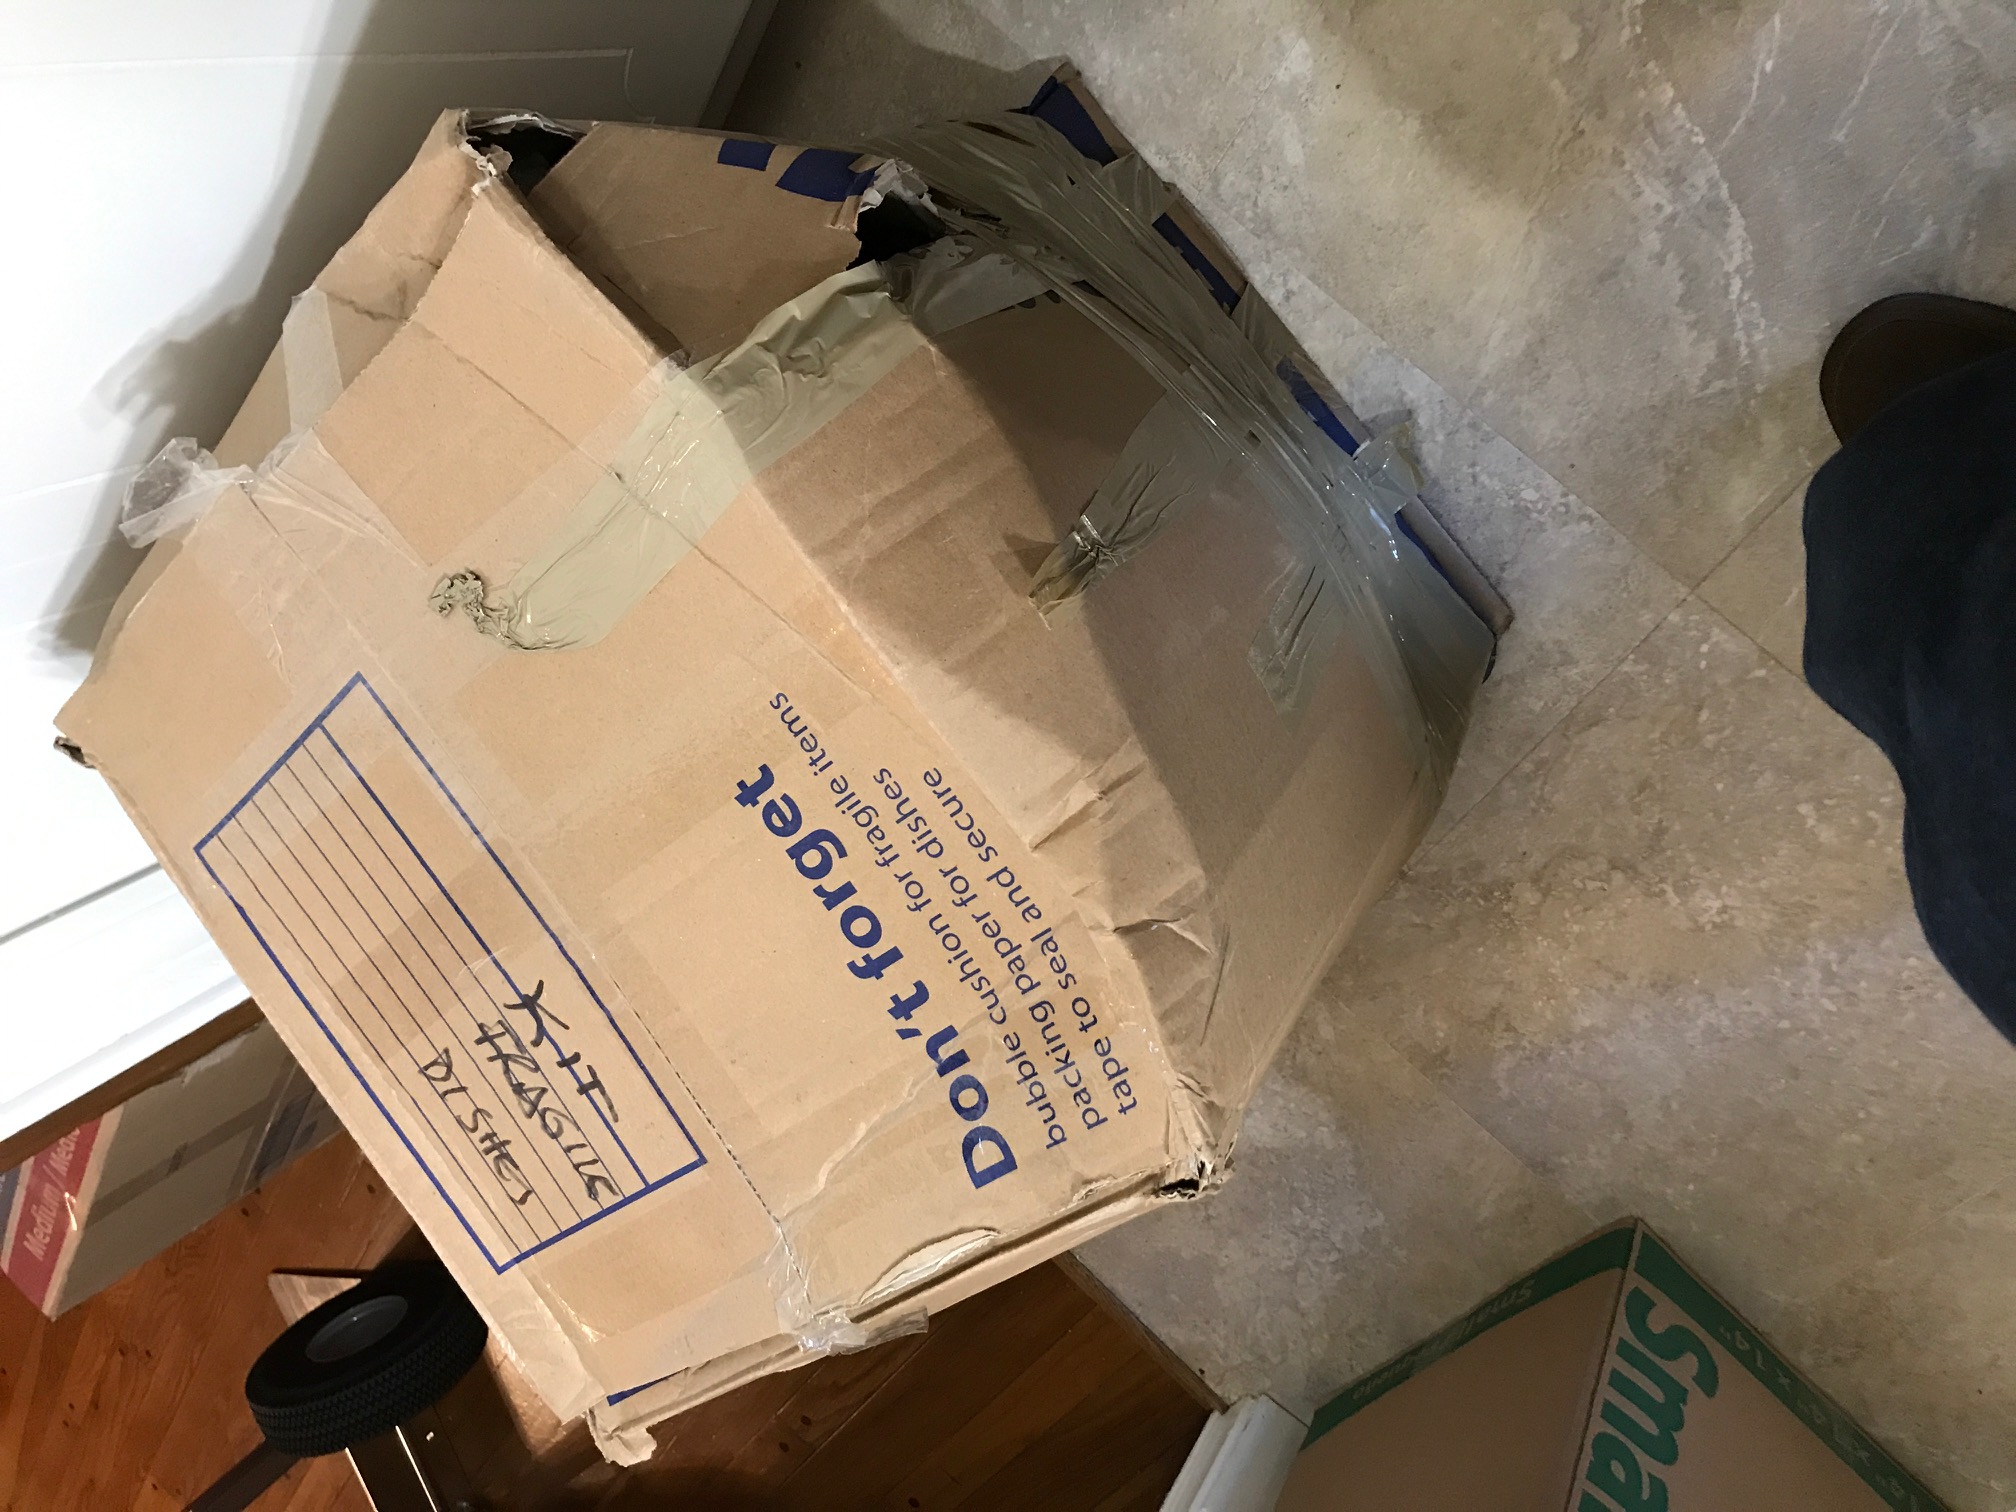 Another crushed box - broken stuff inside